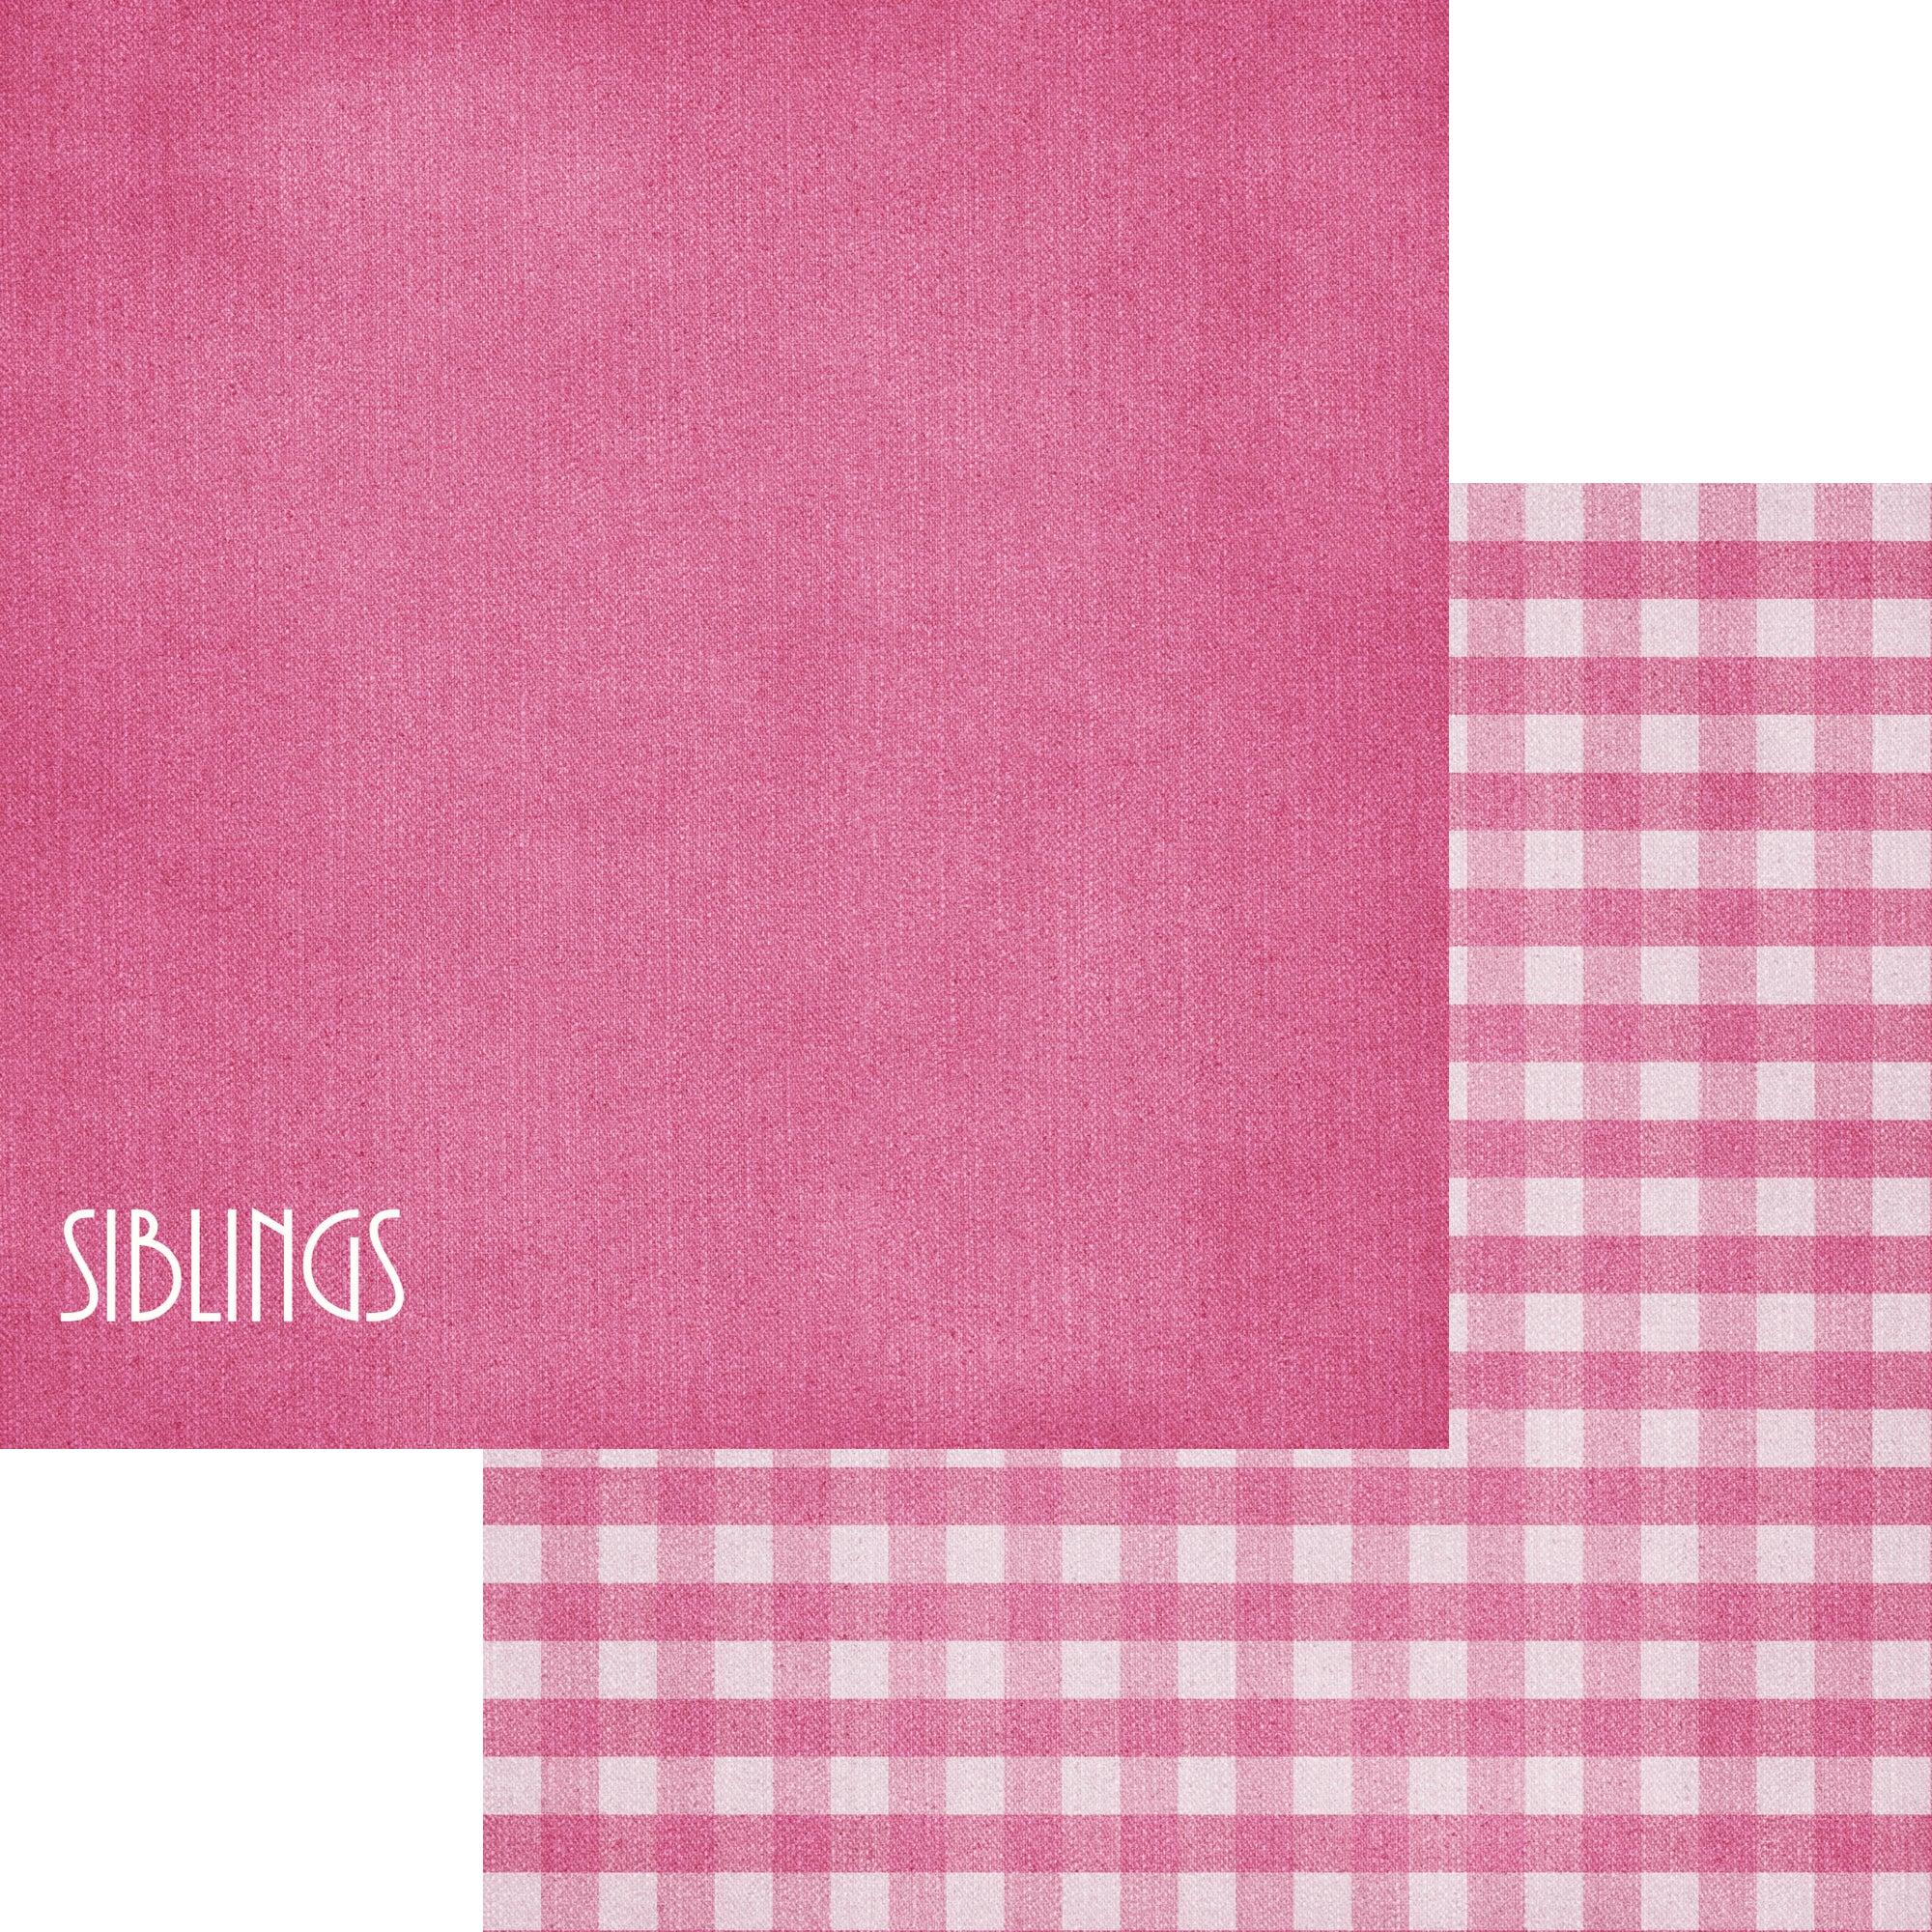 Family Collection Siblings 12 x 12 Double-Sided Scrapbook Paper by SSC Designs